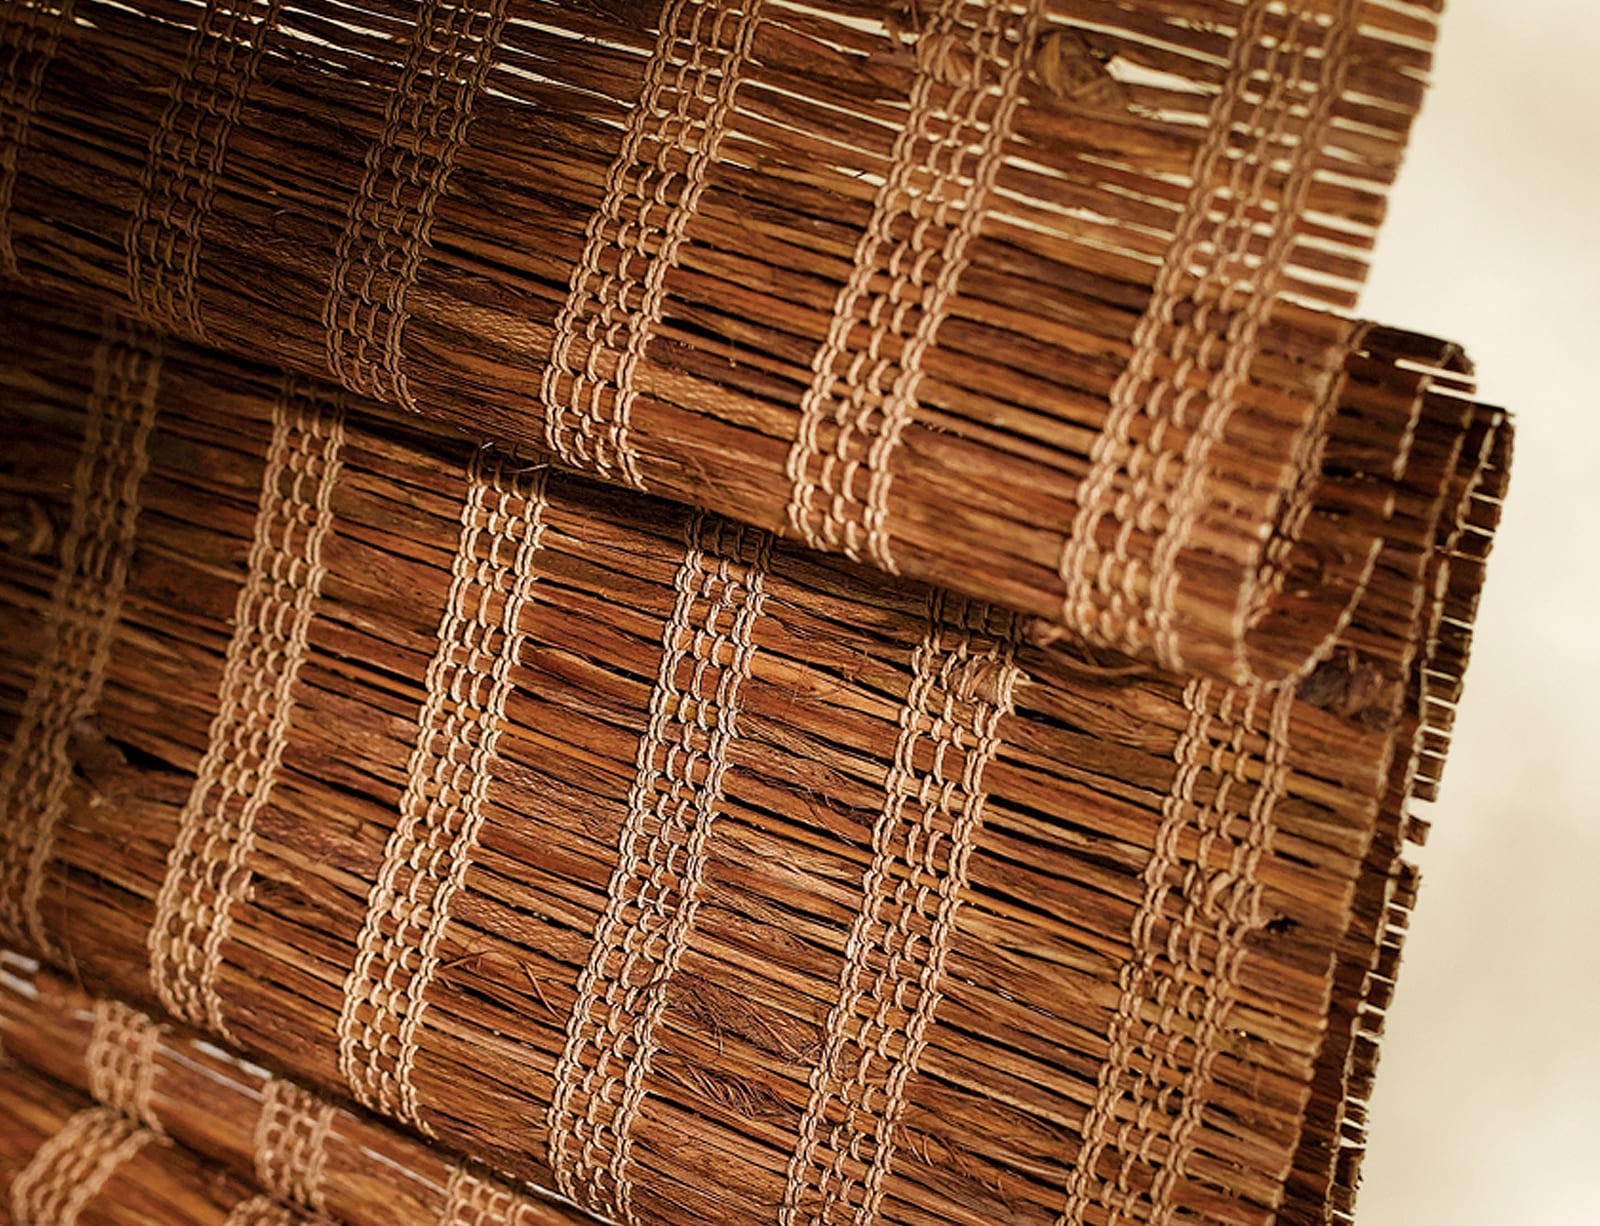 Close up view of a woven wood shutter.